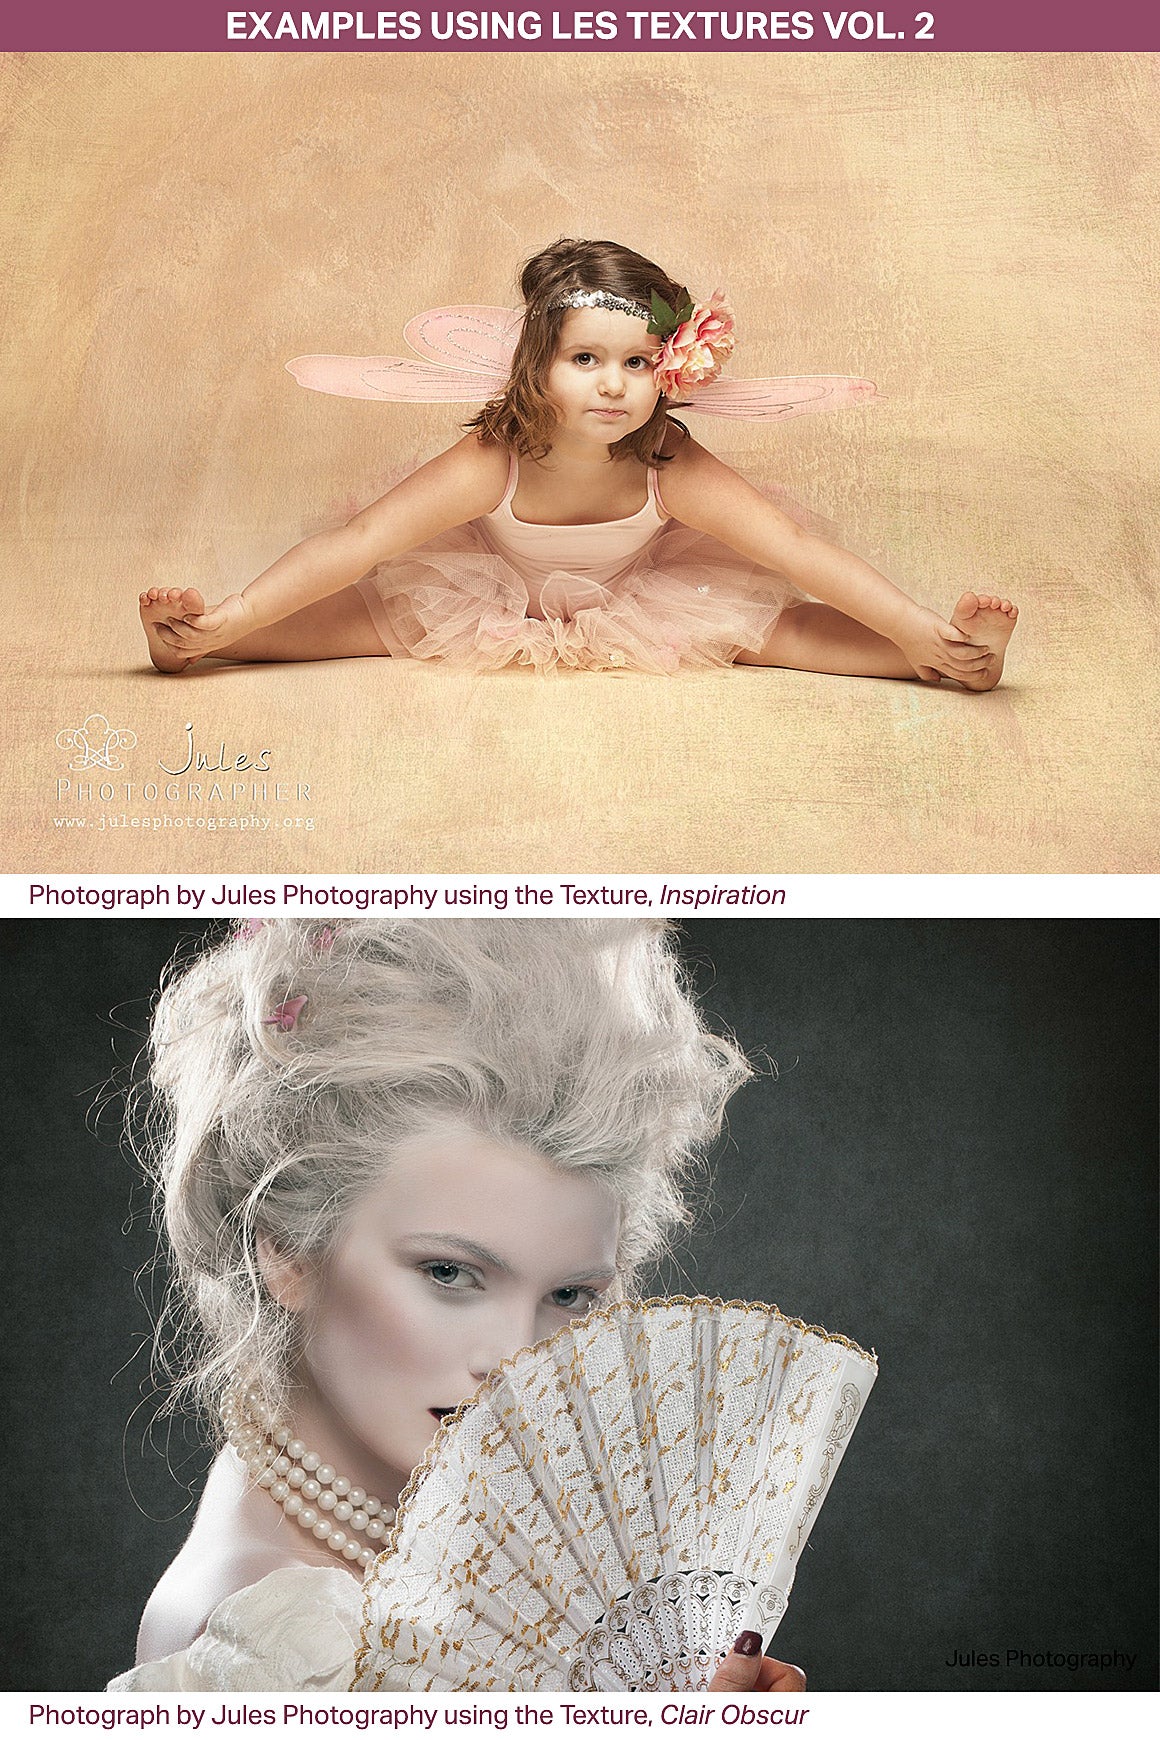 Textured portrait photography examples using the Les Textures 2 Collection. 